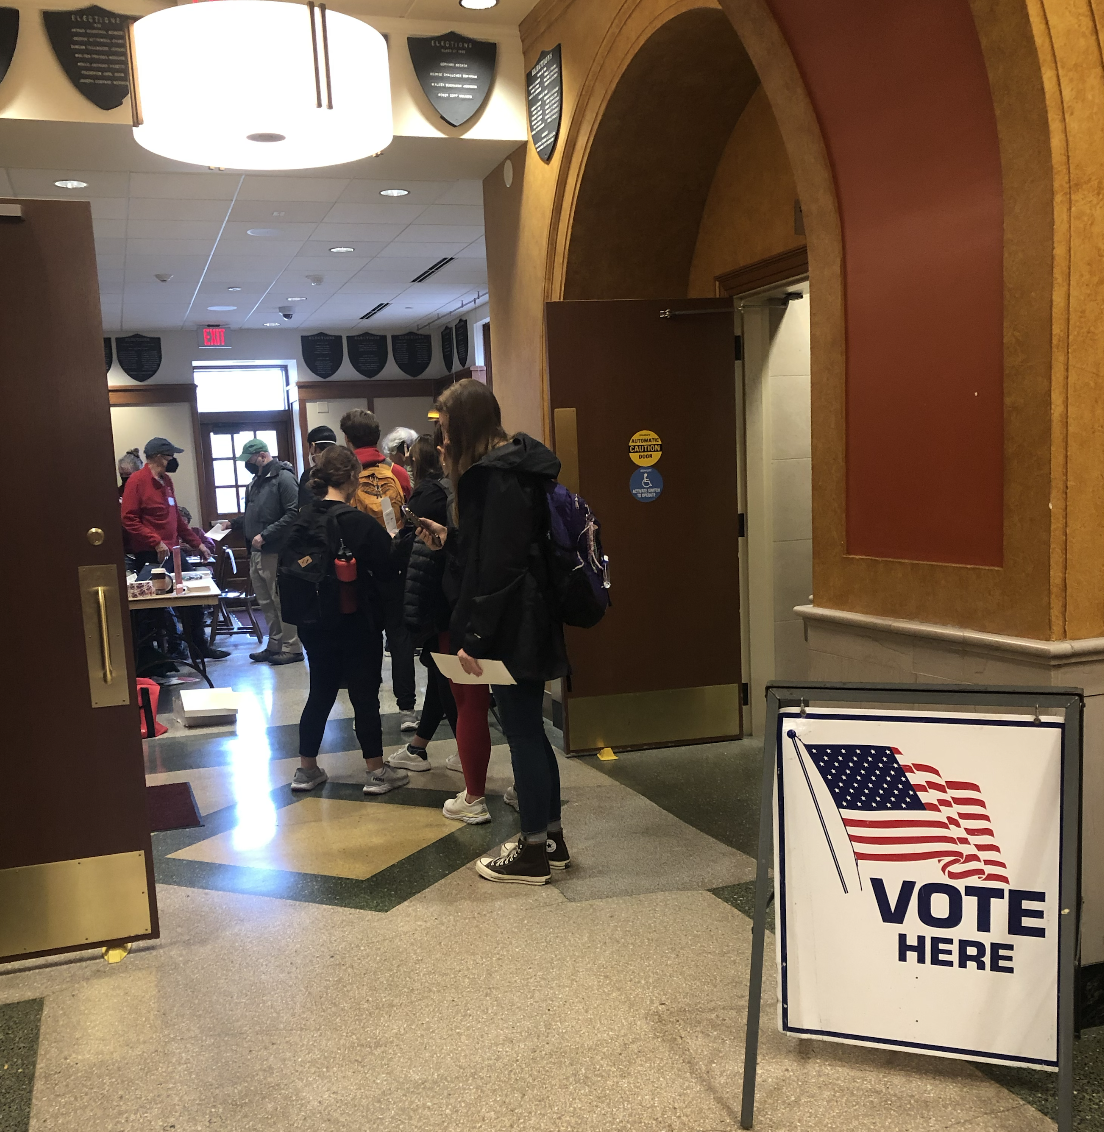 Campus Vote Project begins student registration, early voting for midterm election on campus